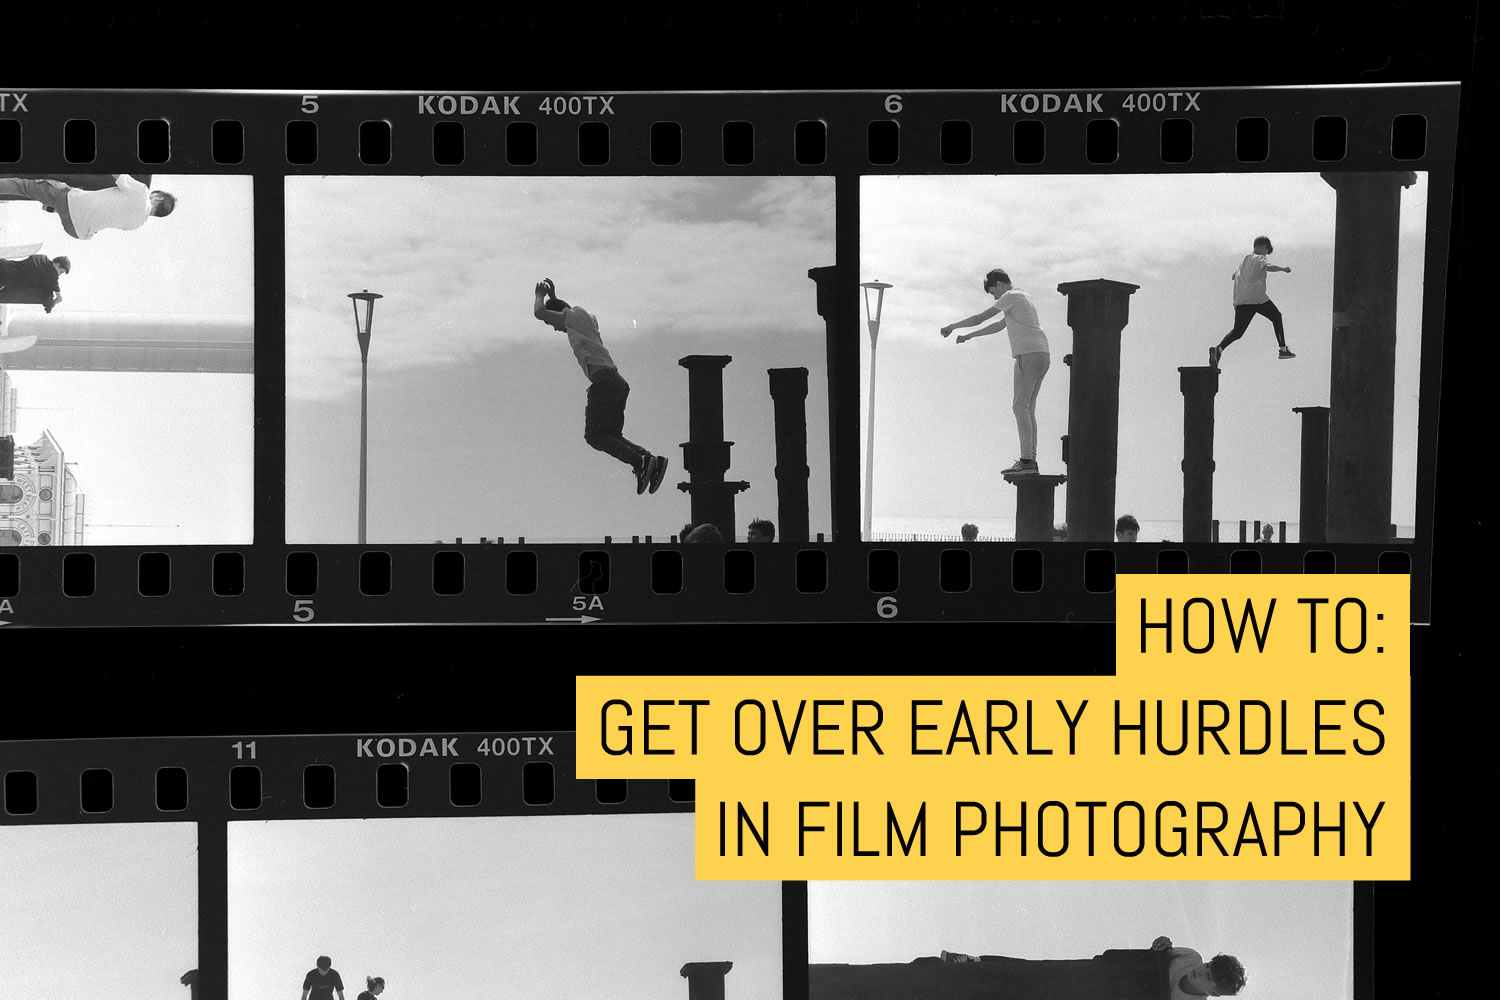 How to: Get over early hurdles in film photography